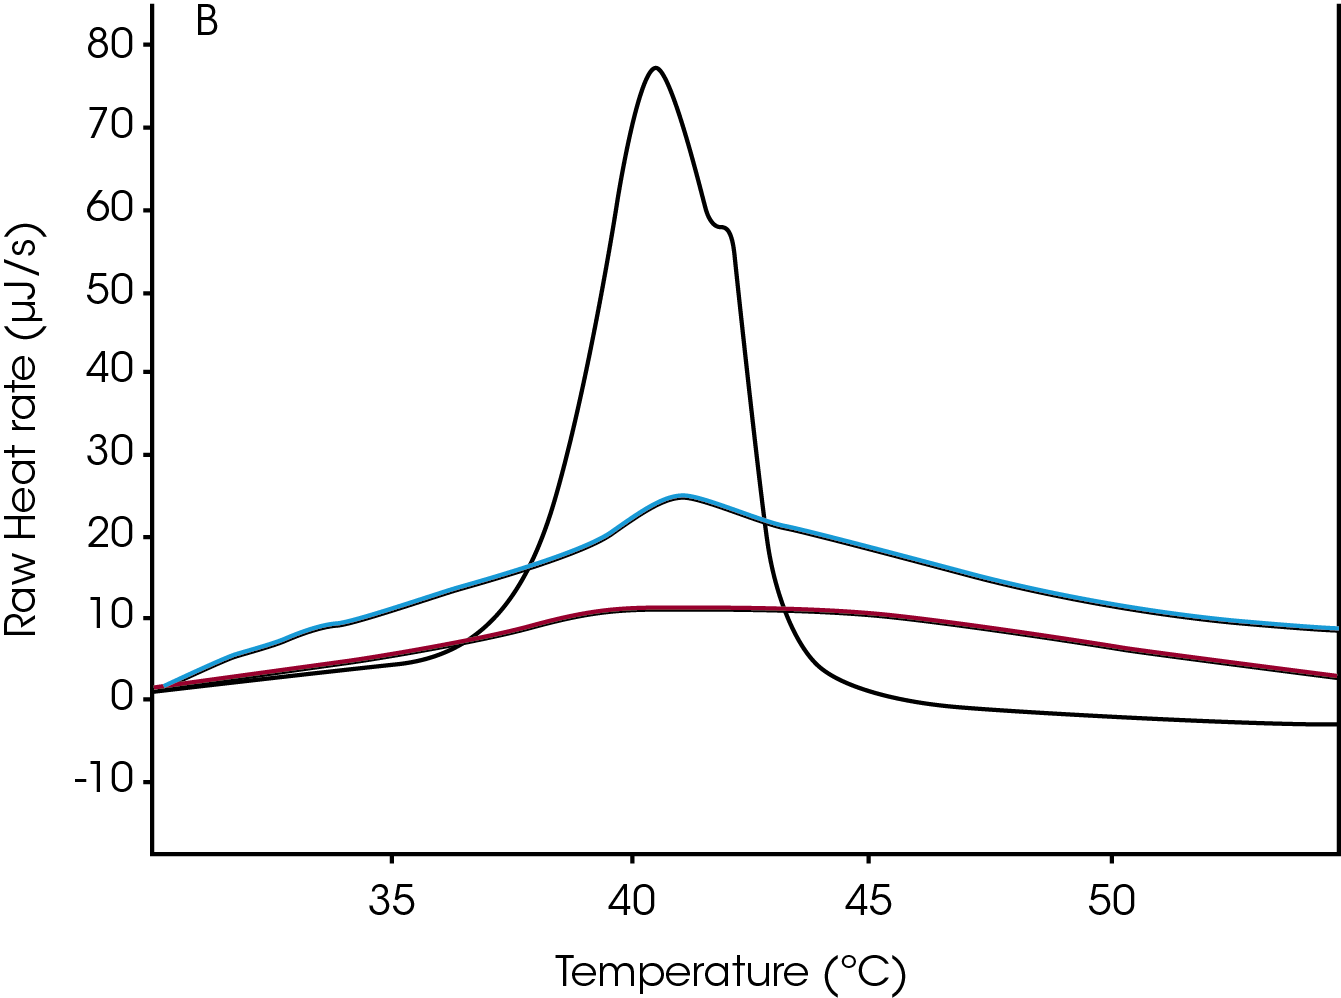 Figure 3. Effect of additives on liposome properties. Black = no cholesterol added, blue = moderate cholesterol percentage incorporated, red = high cholesterol percentage incorporated.